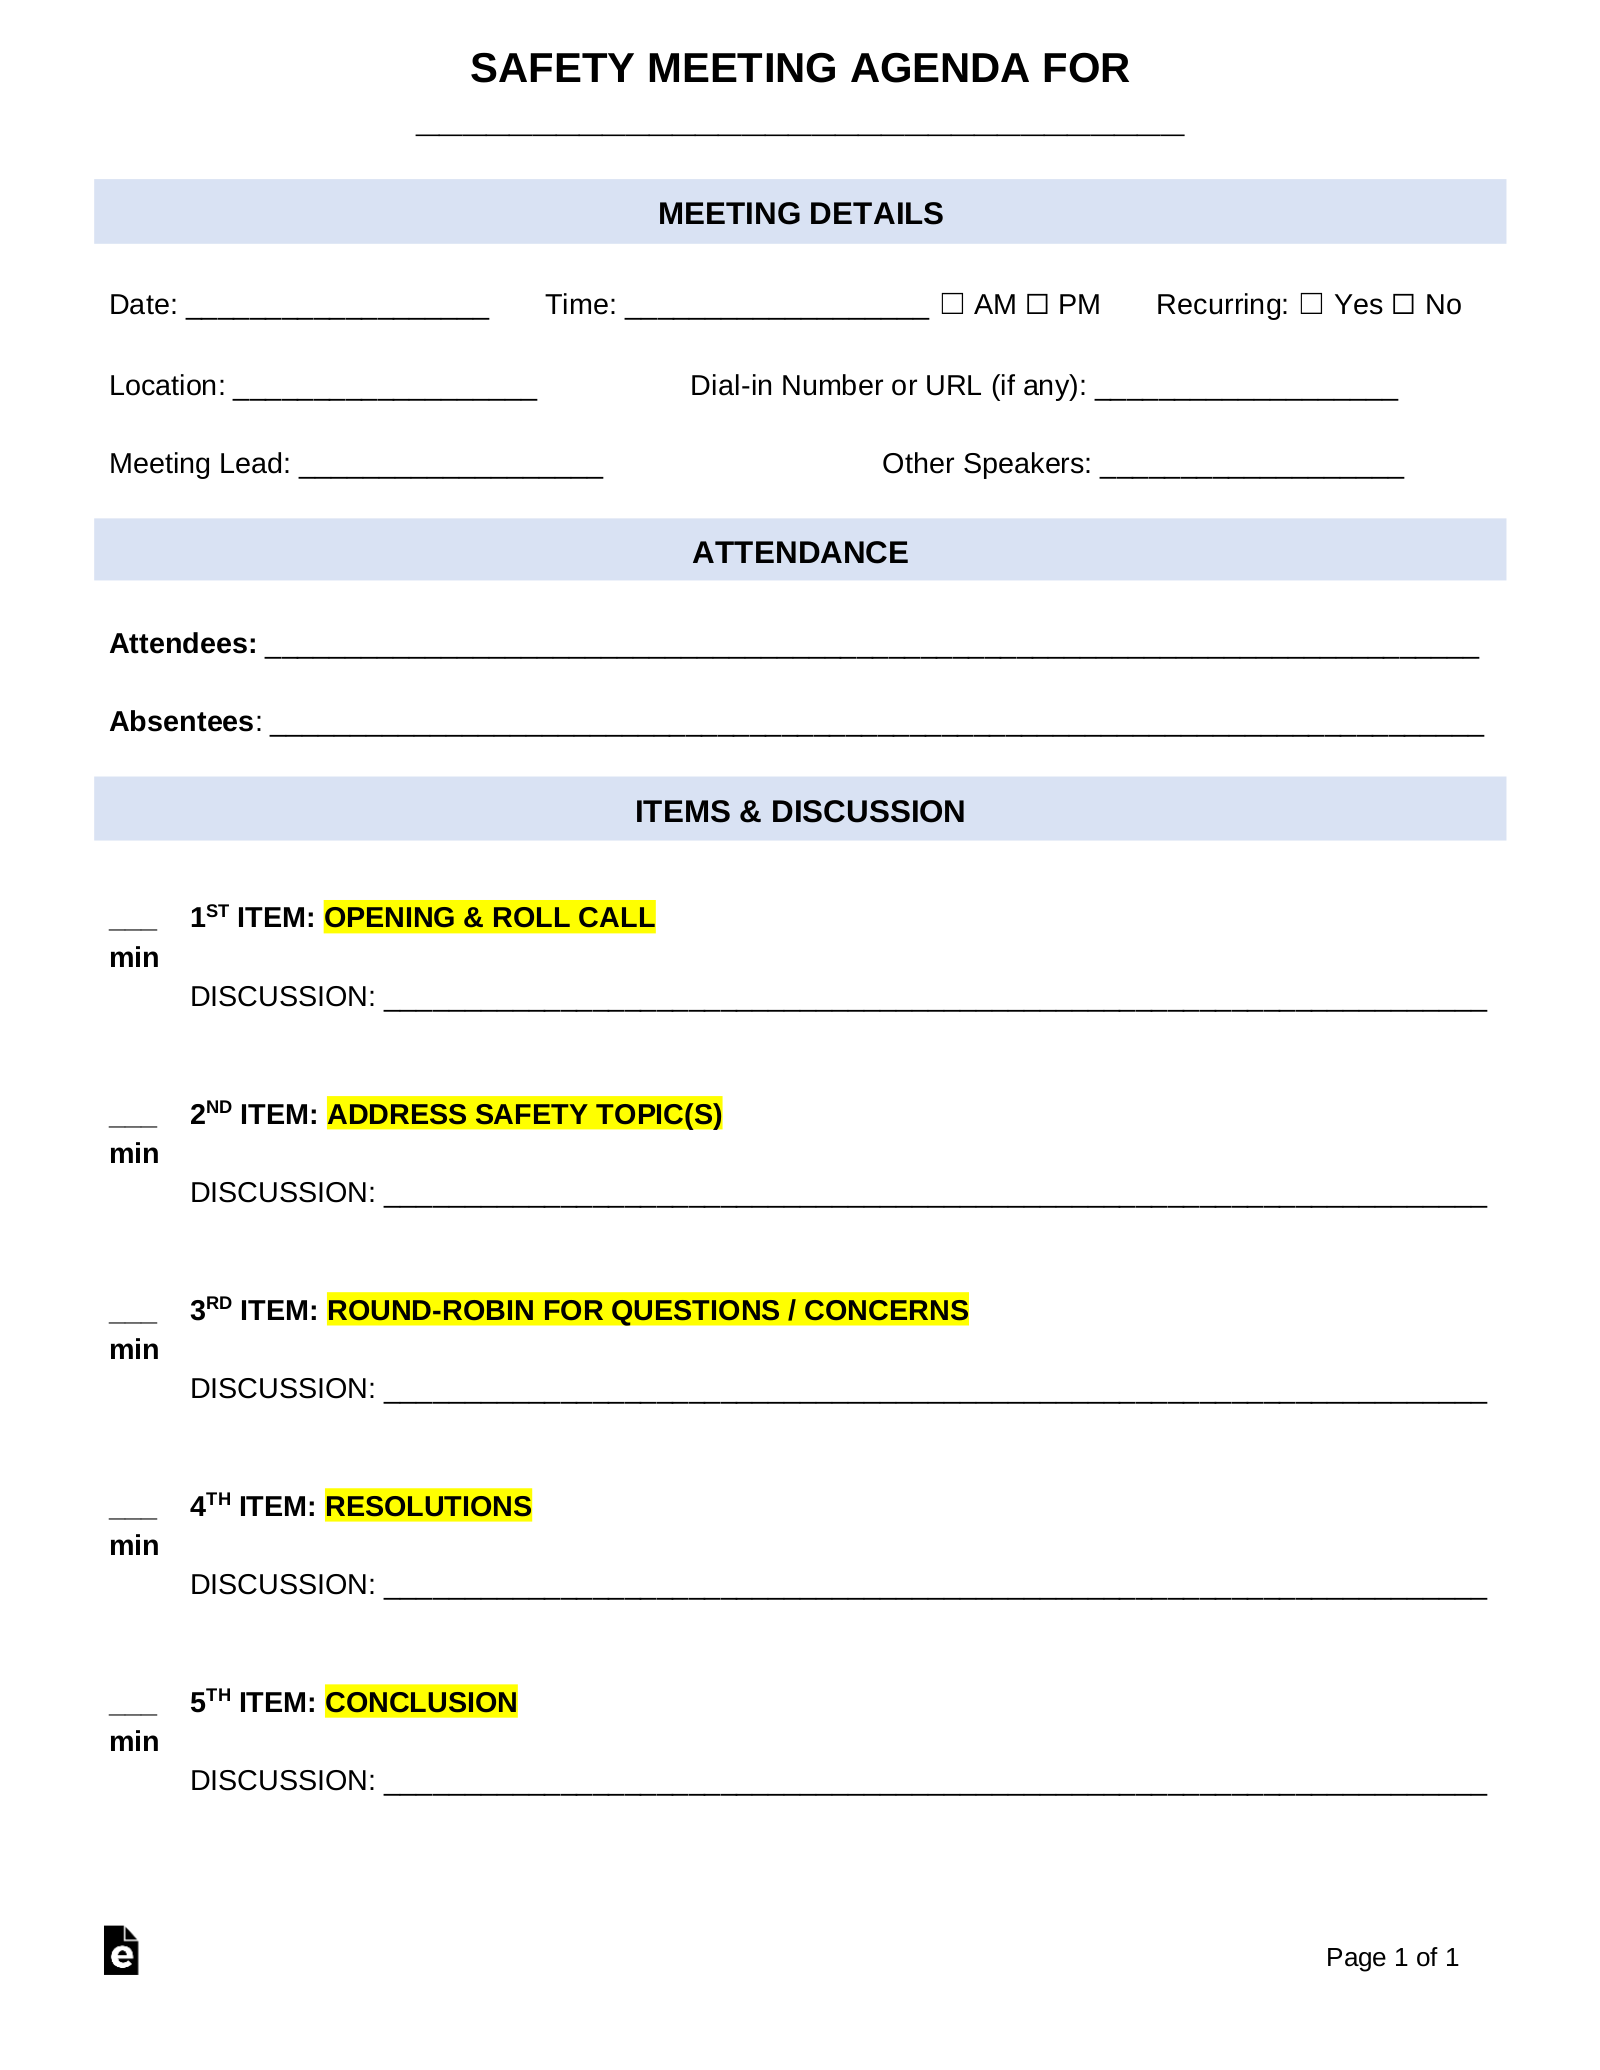 Safety Meeting Agenda Template 